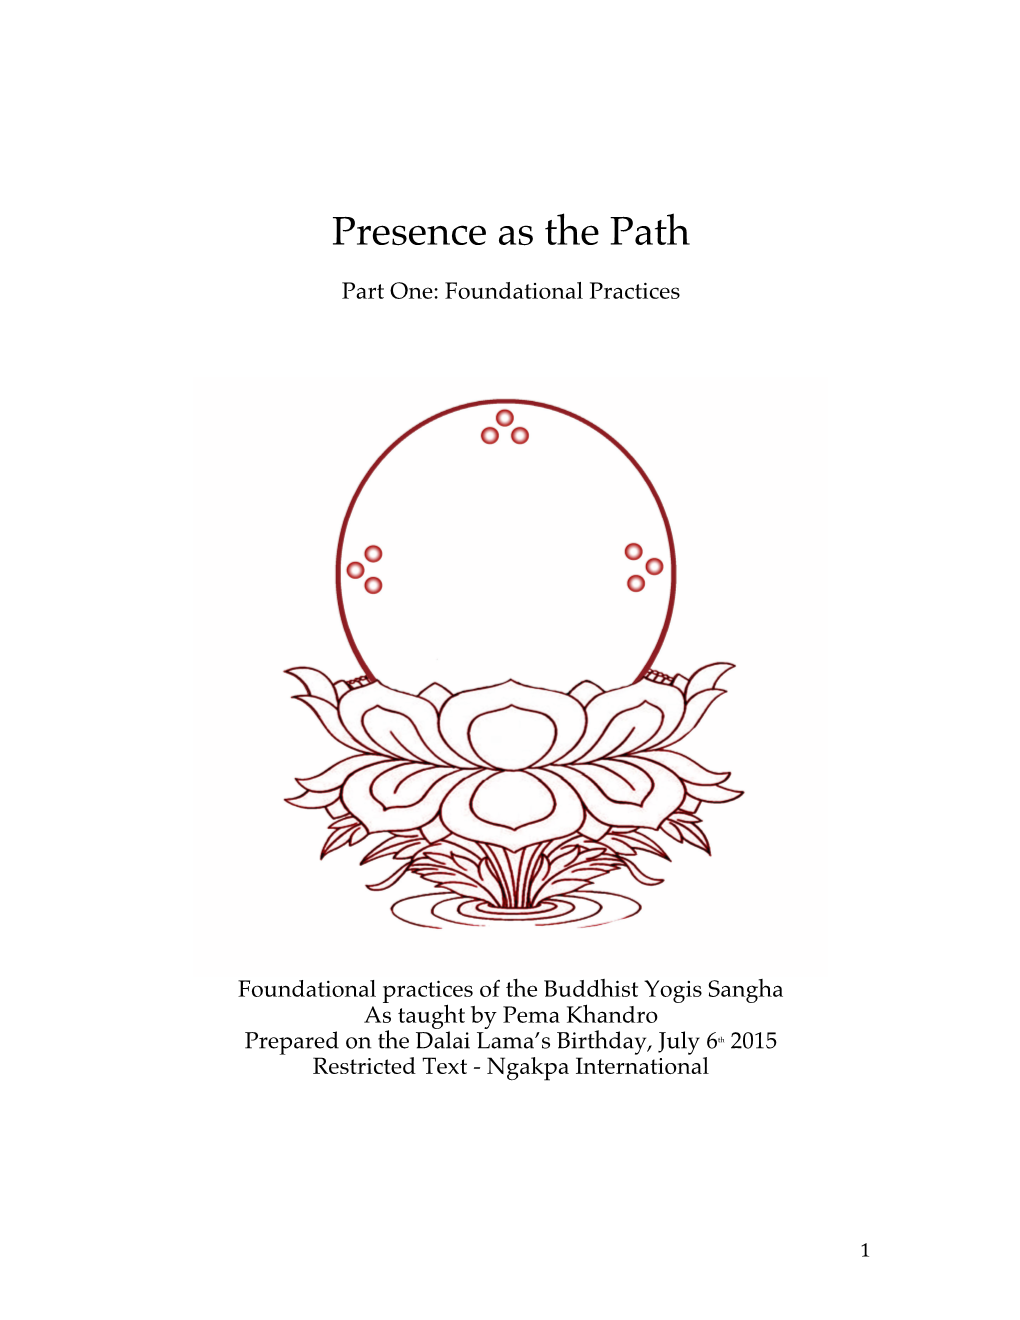 Presence As the Path